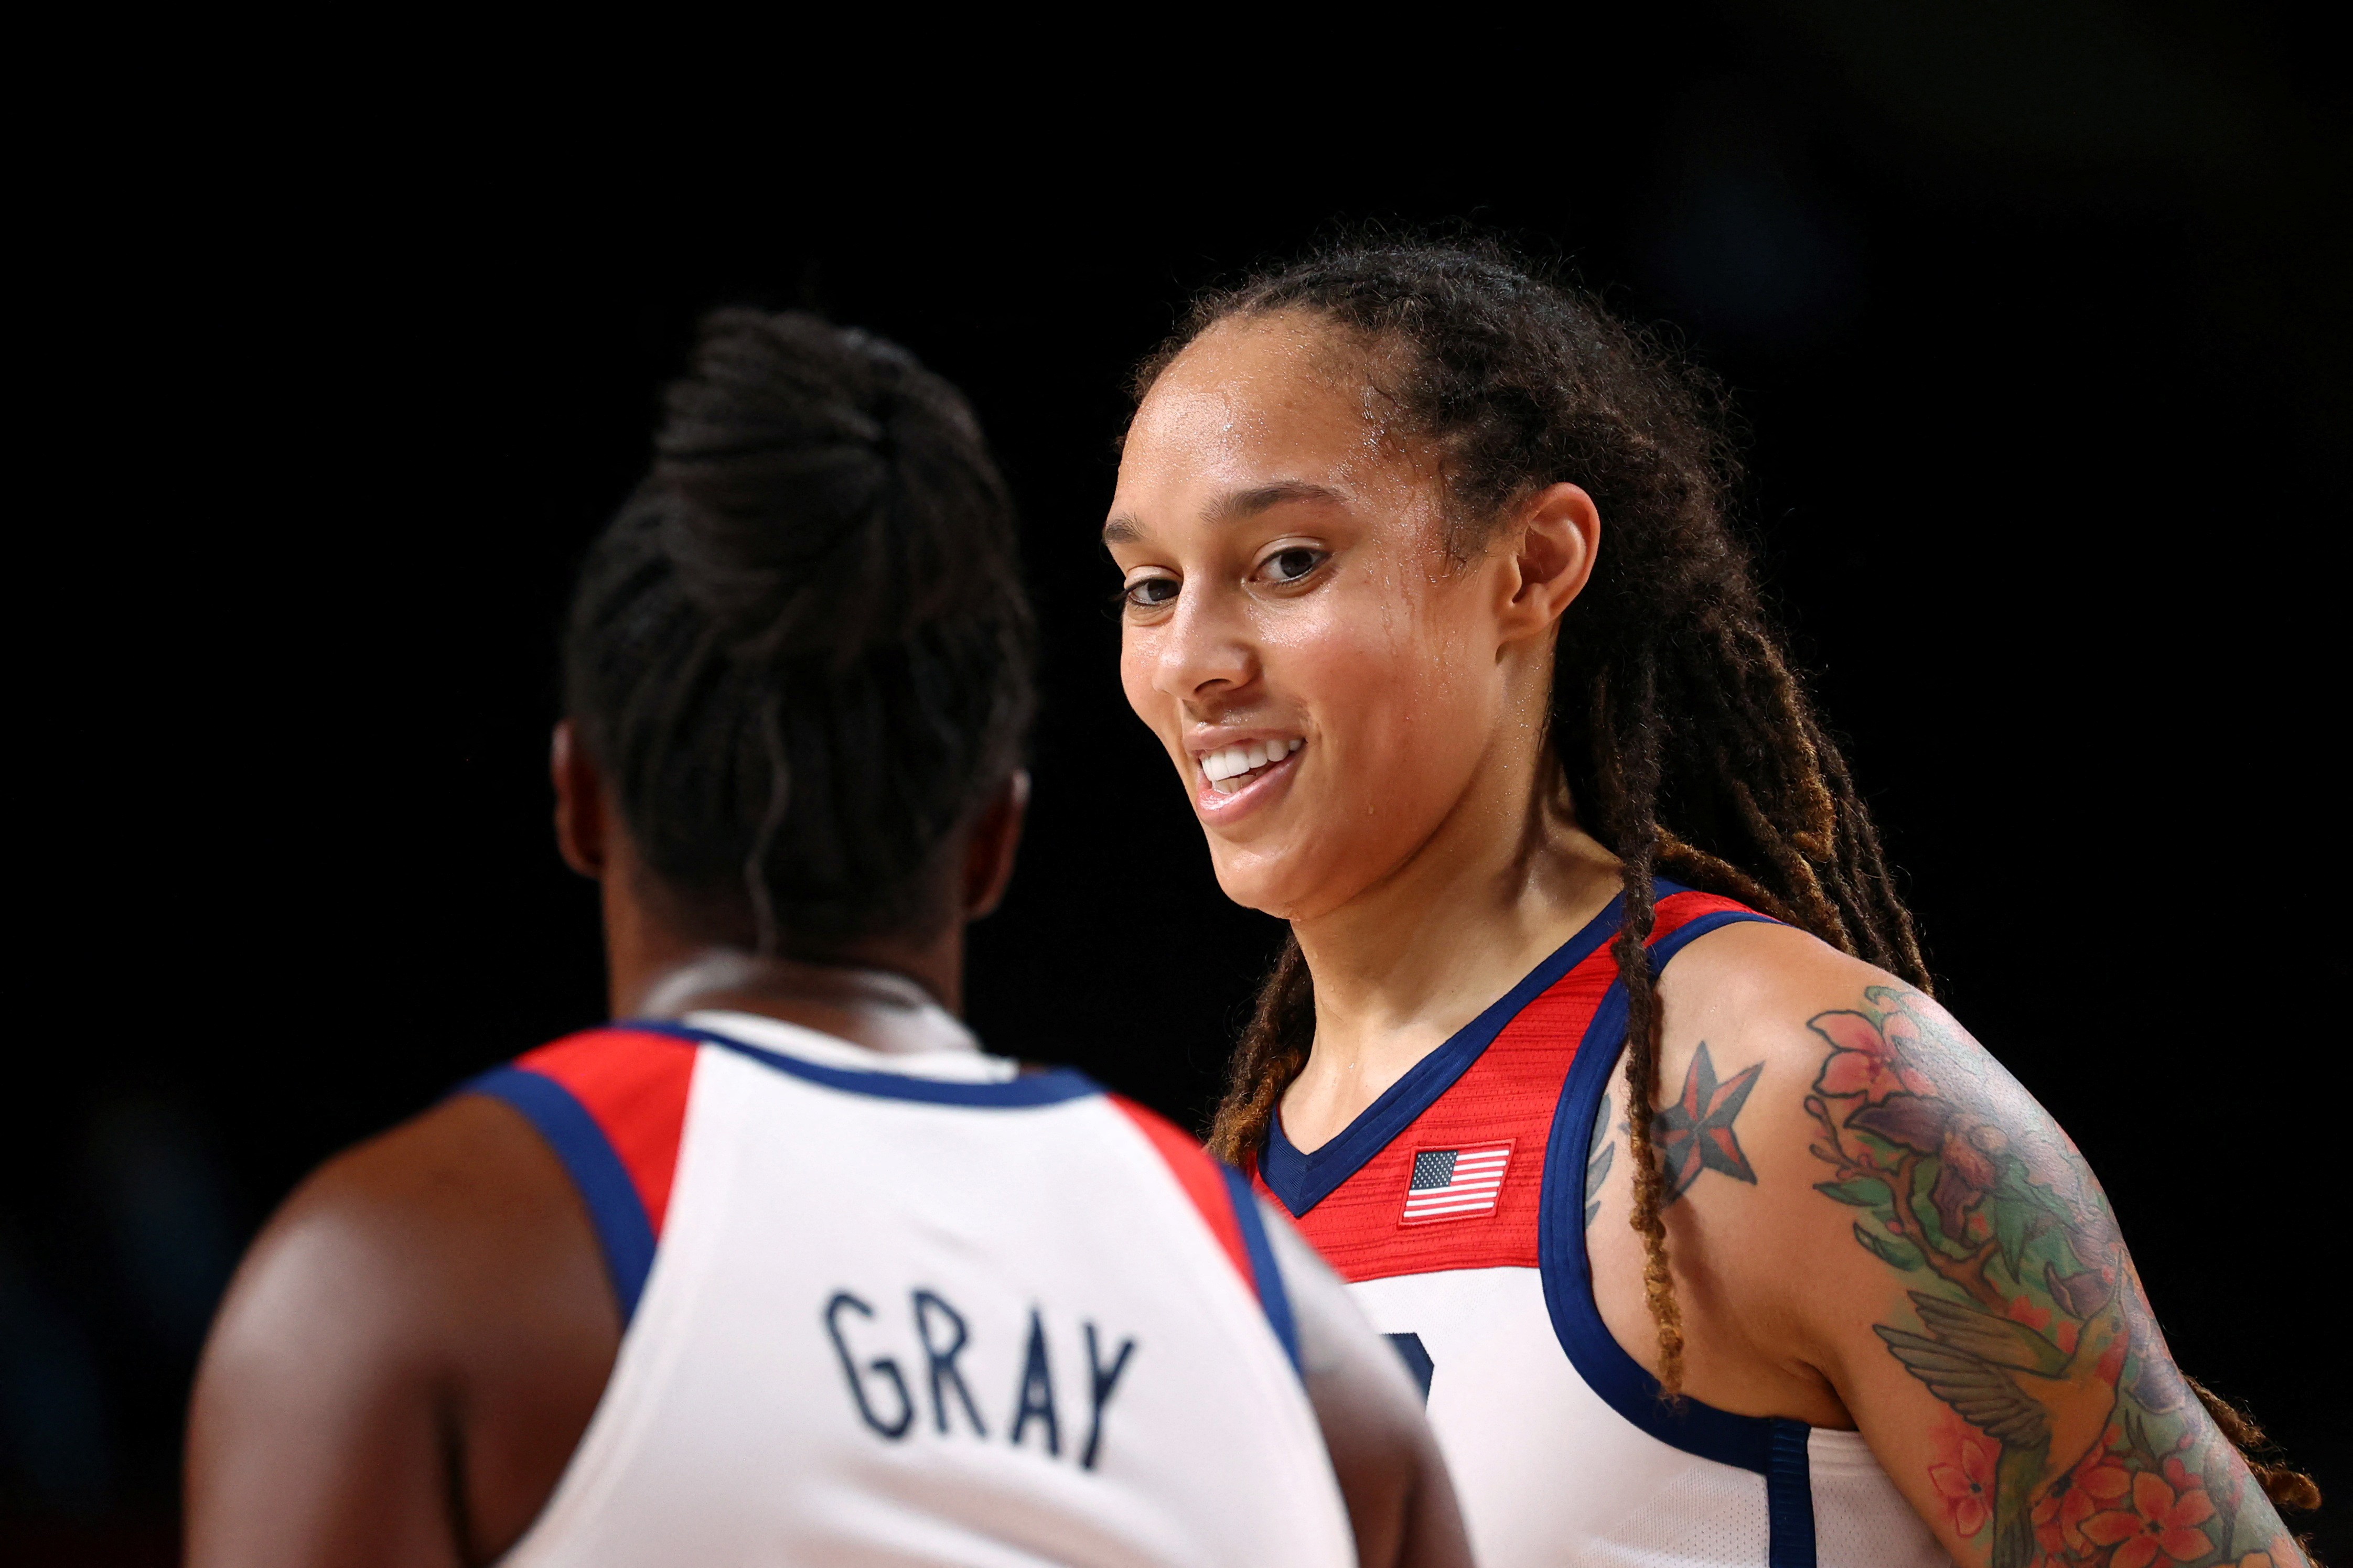 ‘She is coming dwelling!’: Sports activities world cheers Griner’s launch